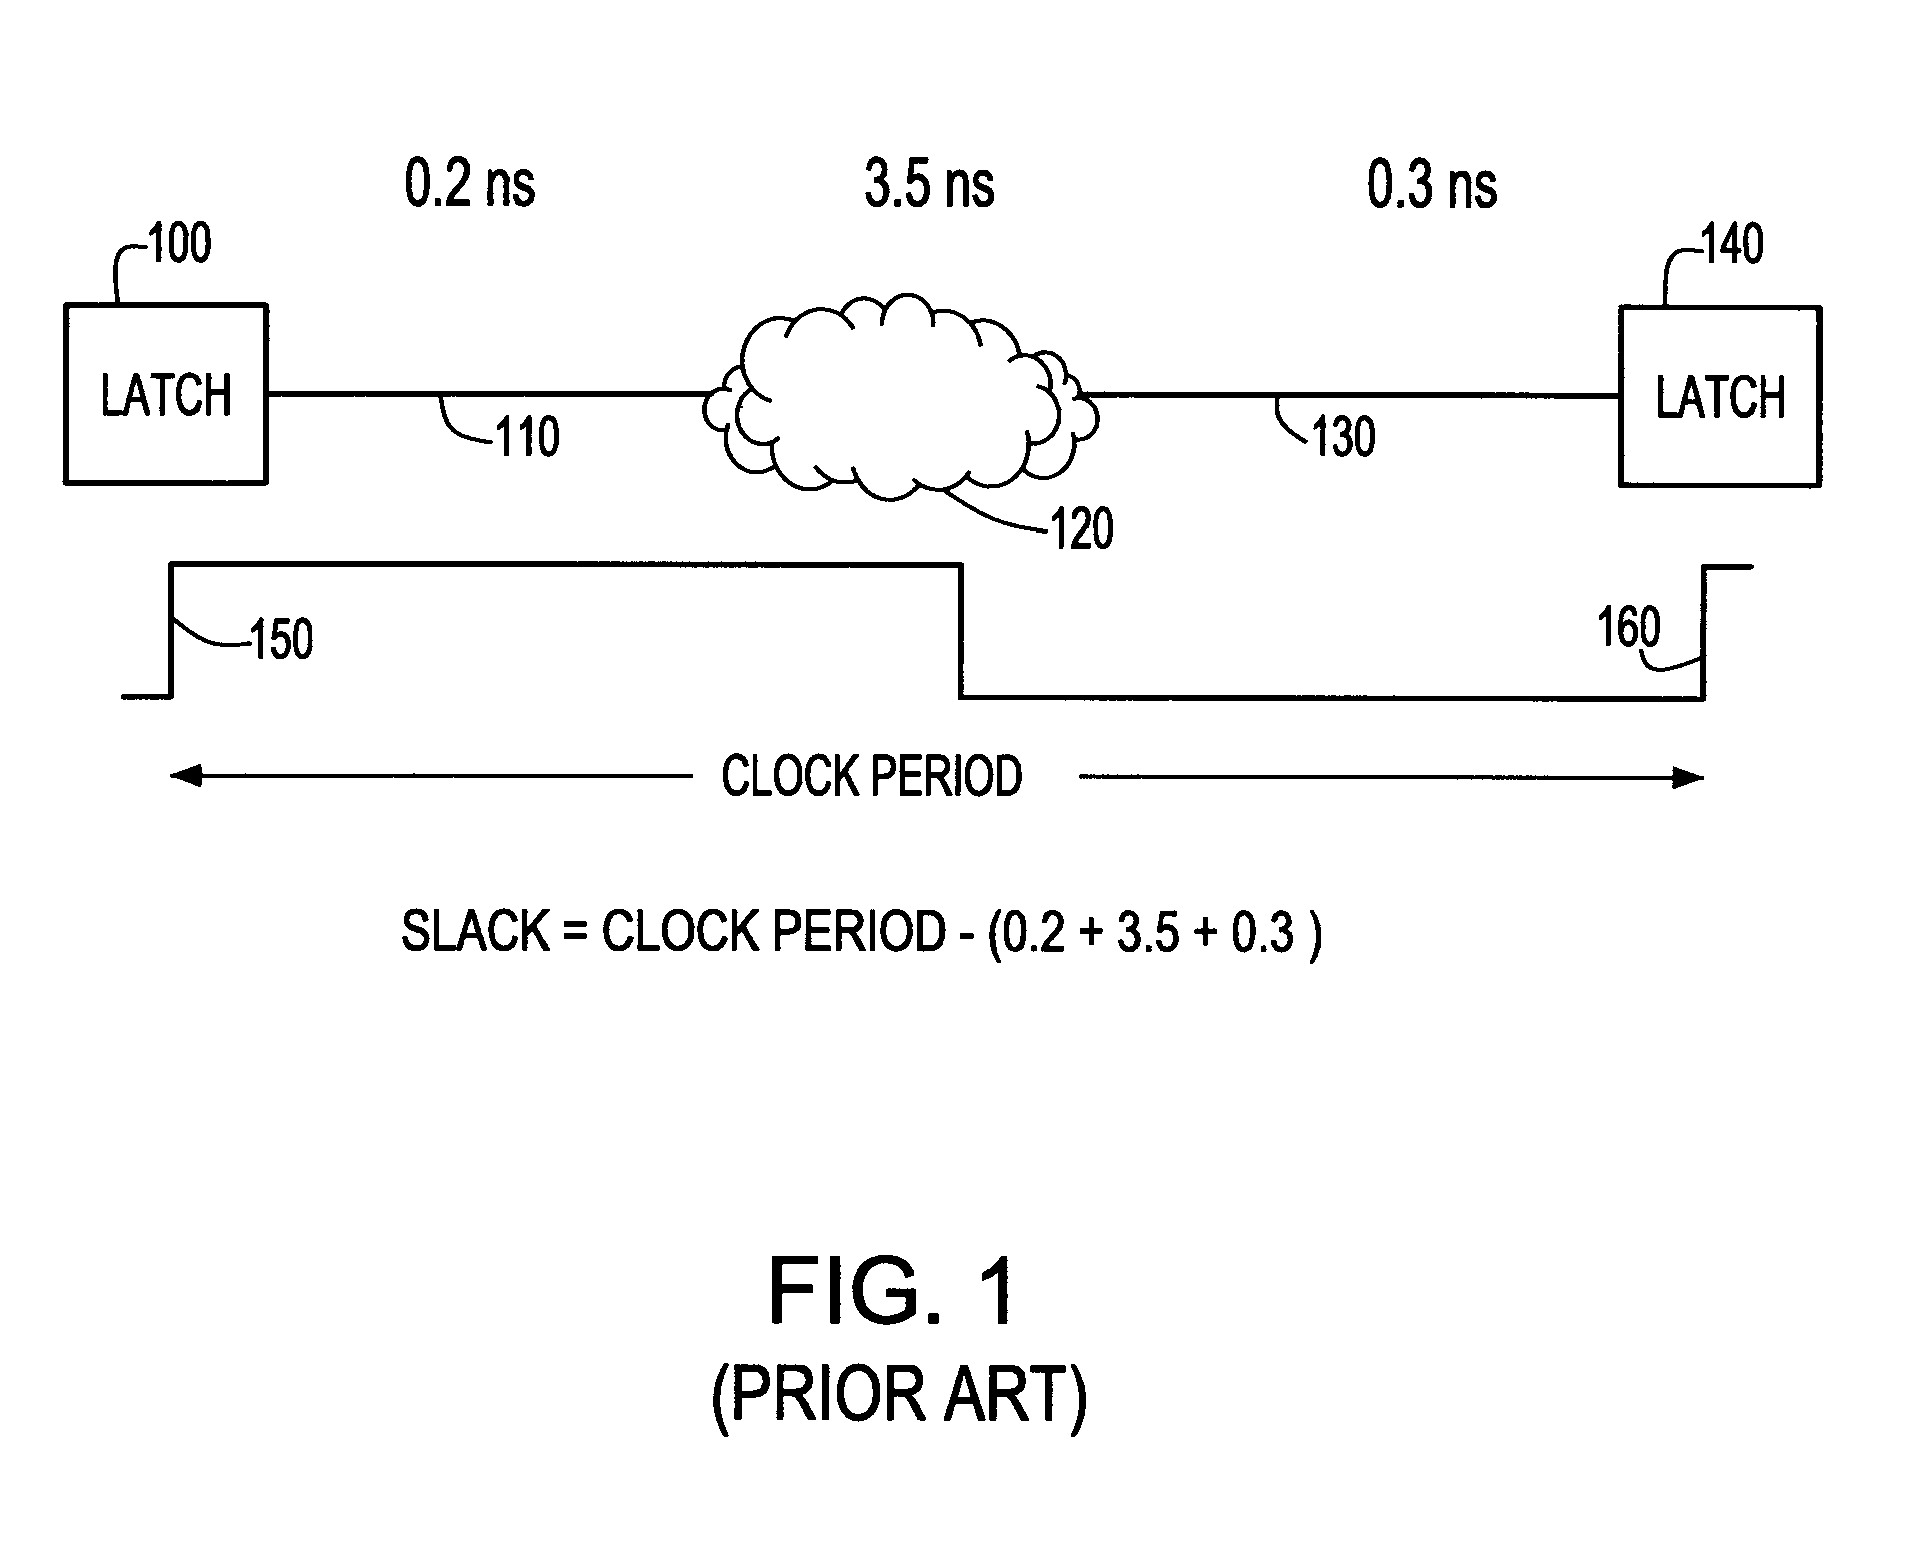 Clock tree distribution generation by determining allowed placement regions for clocked elements